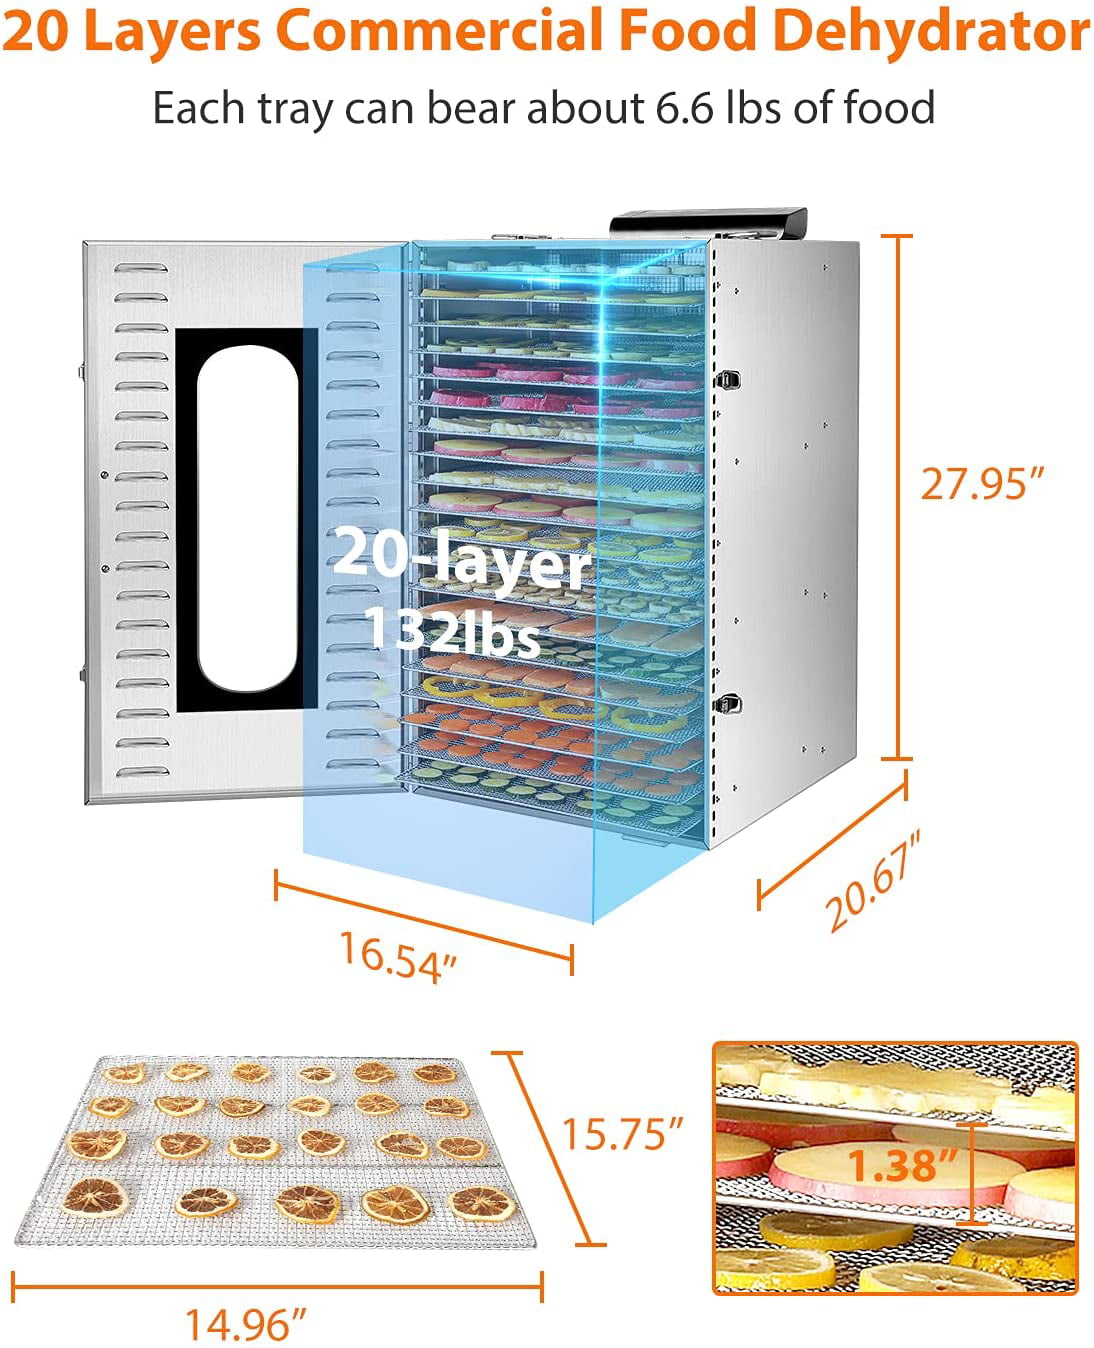 Stainless Steel GDOR Food Dehydrator with 8 Trays, Digital Adjustable Timer  & Tempe Control Food Dryer Machine for Jerky, Vegetable, Fruit, Meat, Dog